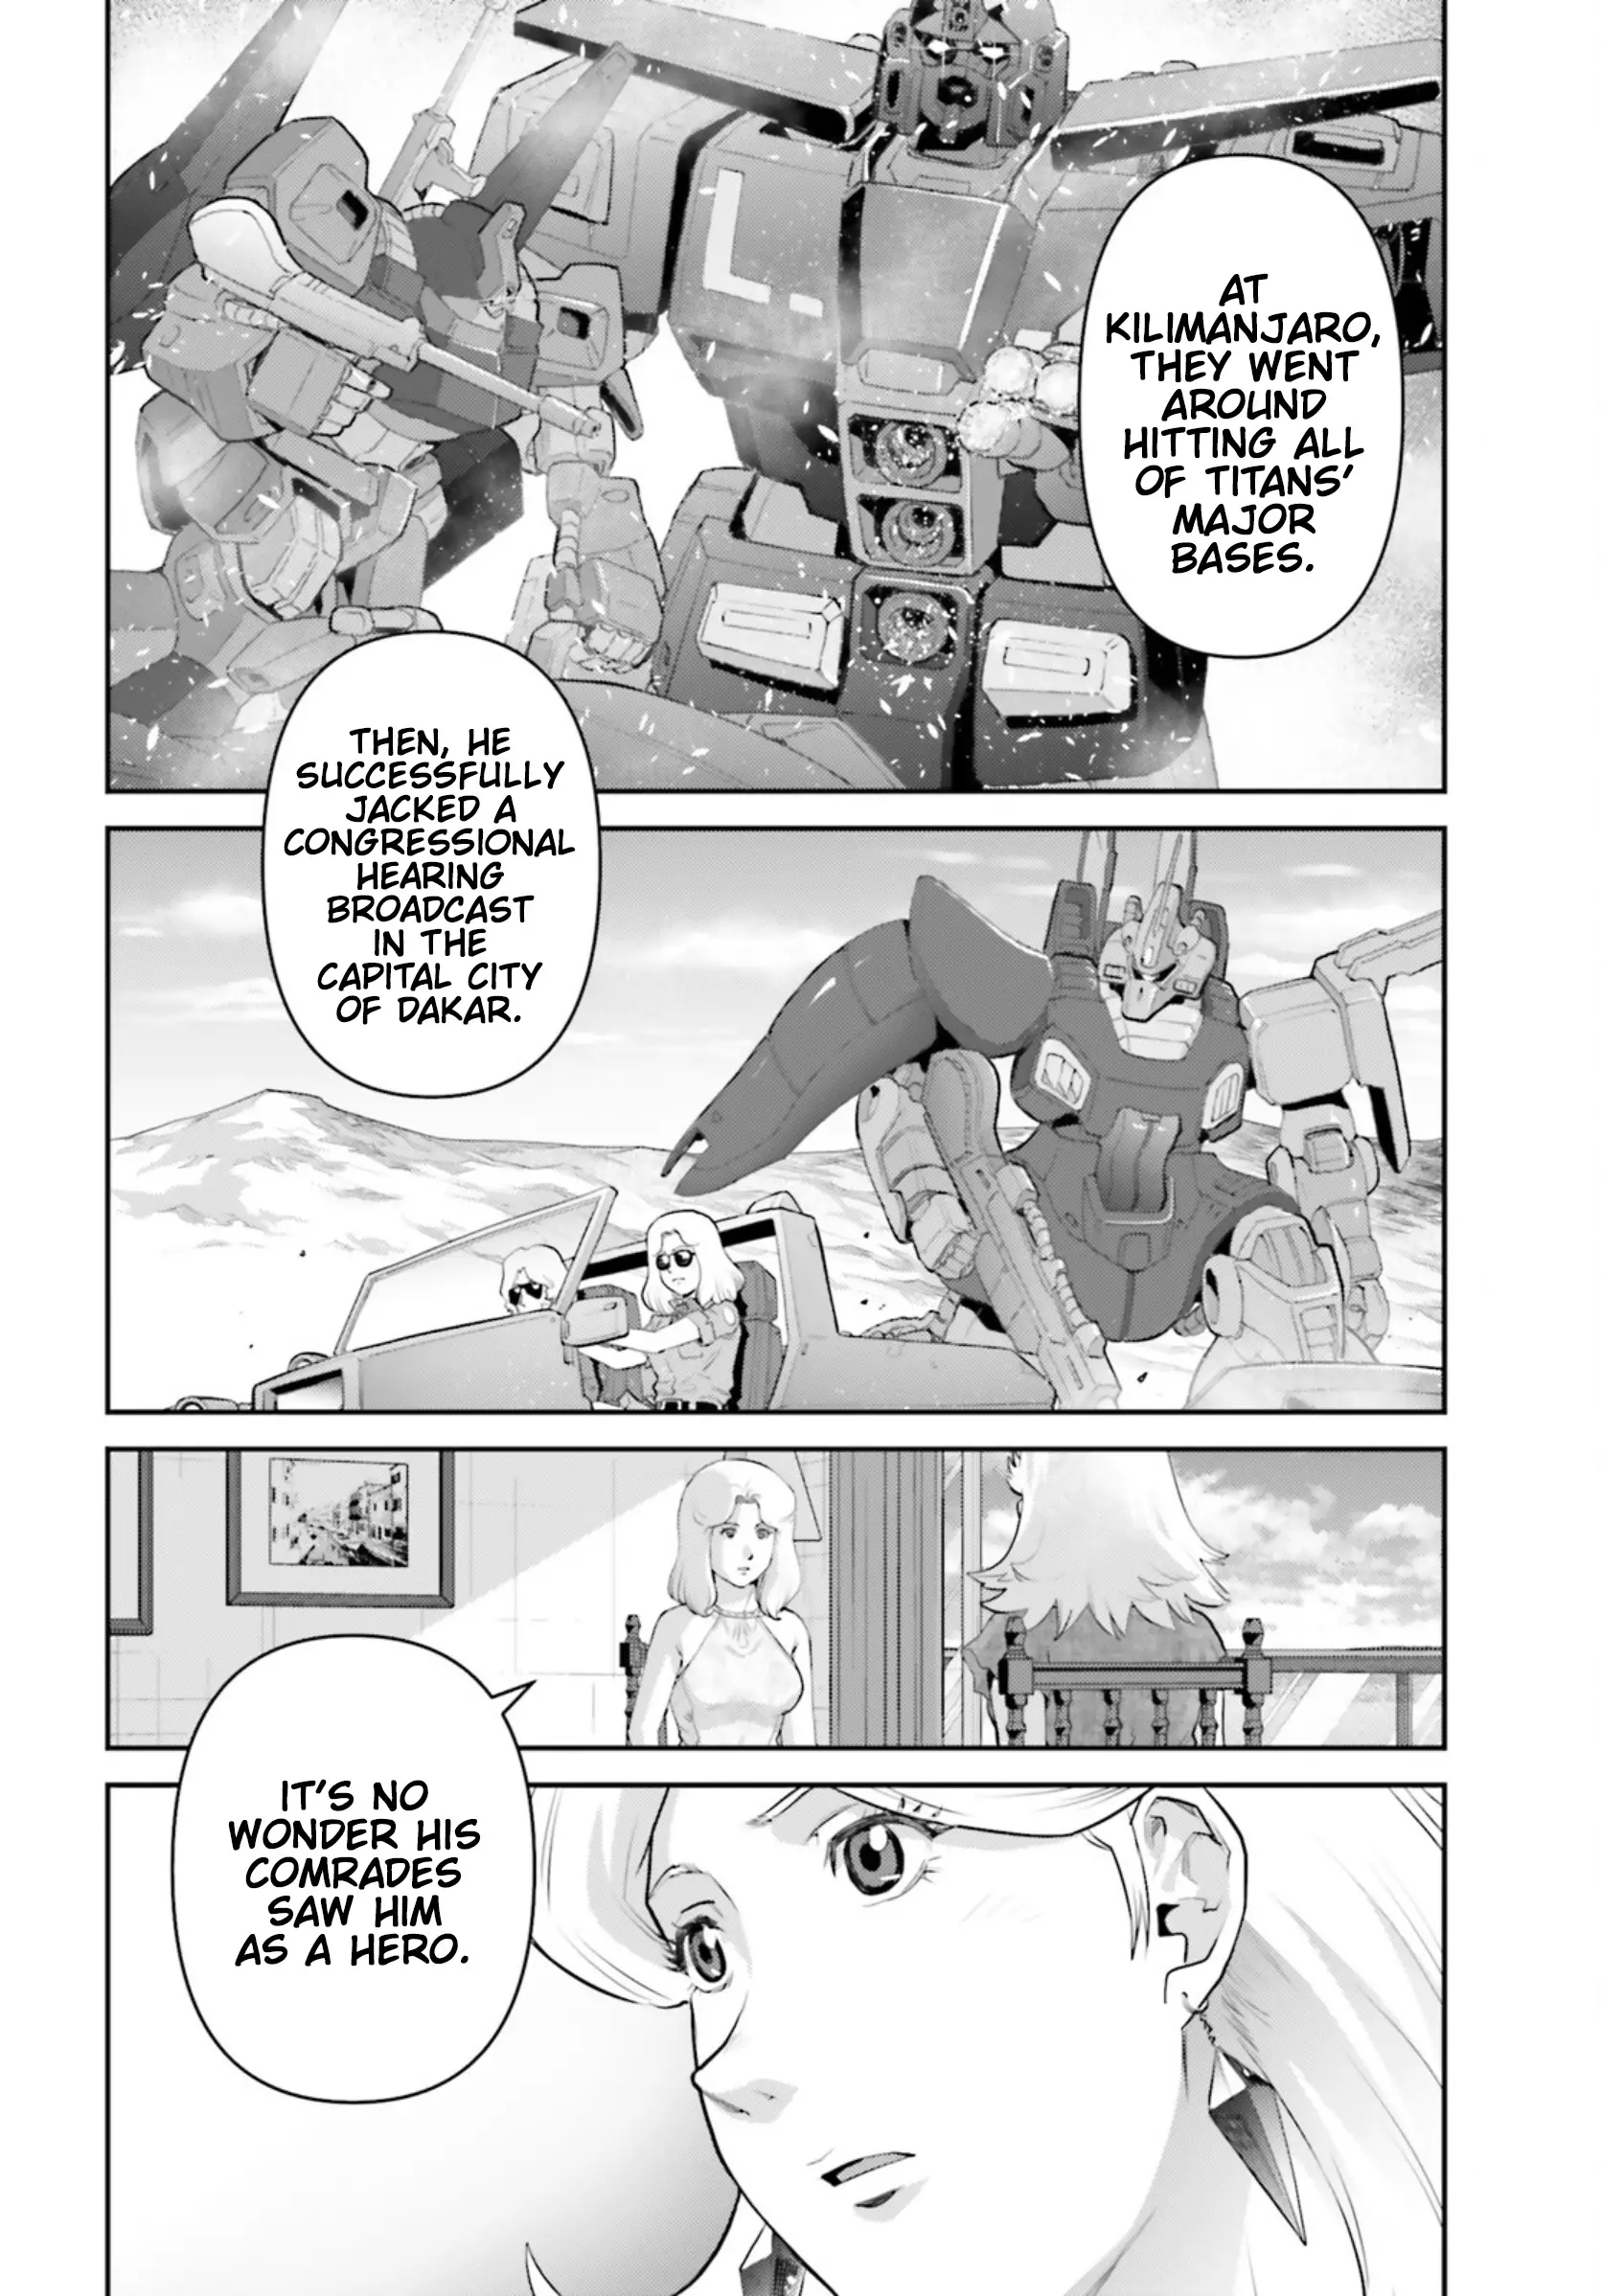 Mobile Suit Gundam Pulitzer - Amuro Ray Beyond The Aurora - 18 page 4-528a6582